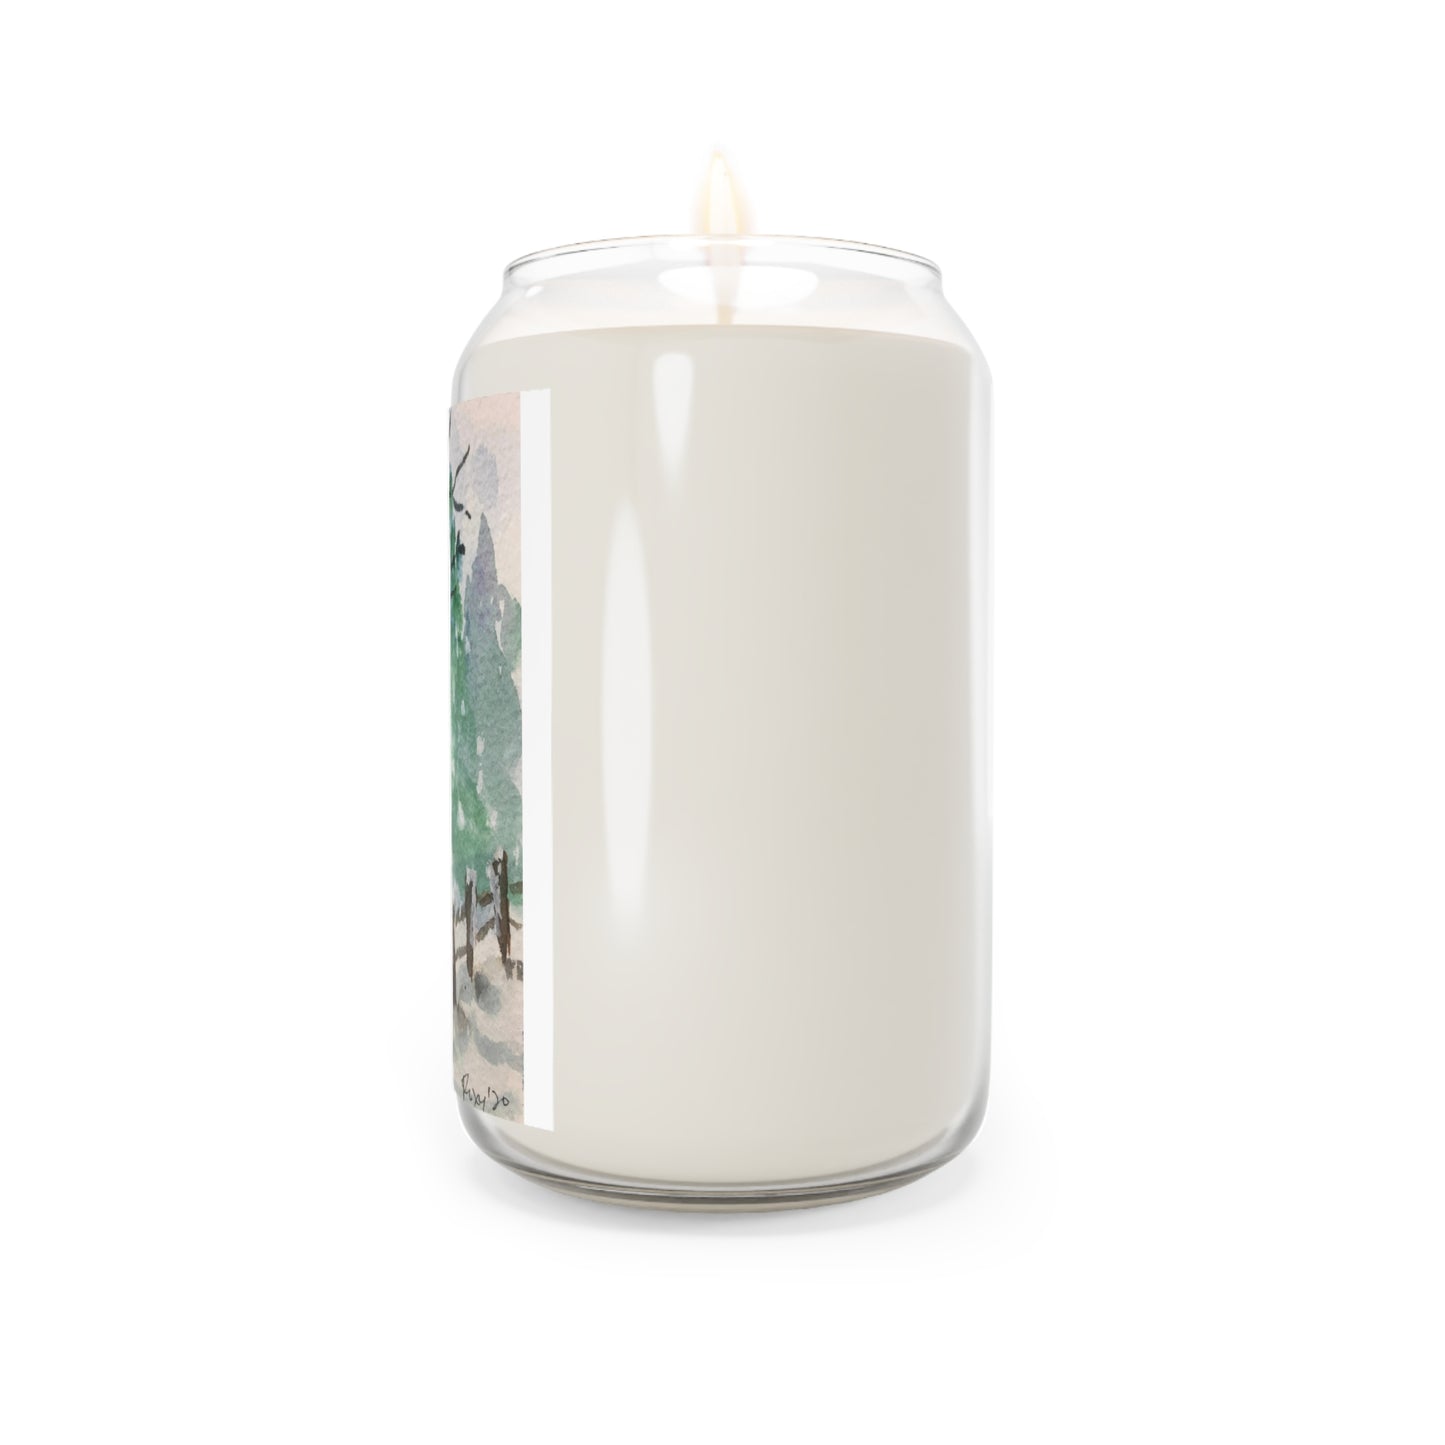 Snowy Trees and Fence Winter Scene Scented Candle, 13.75oz